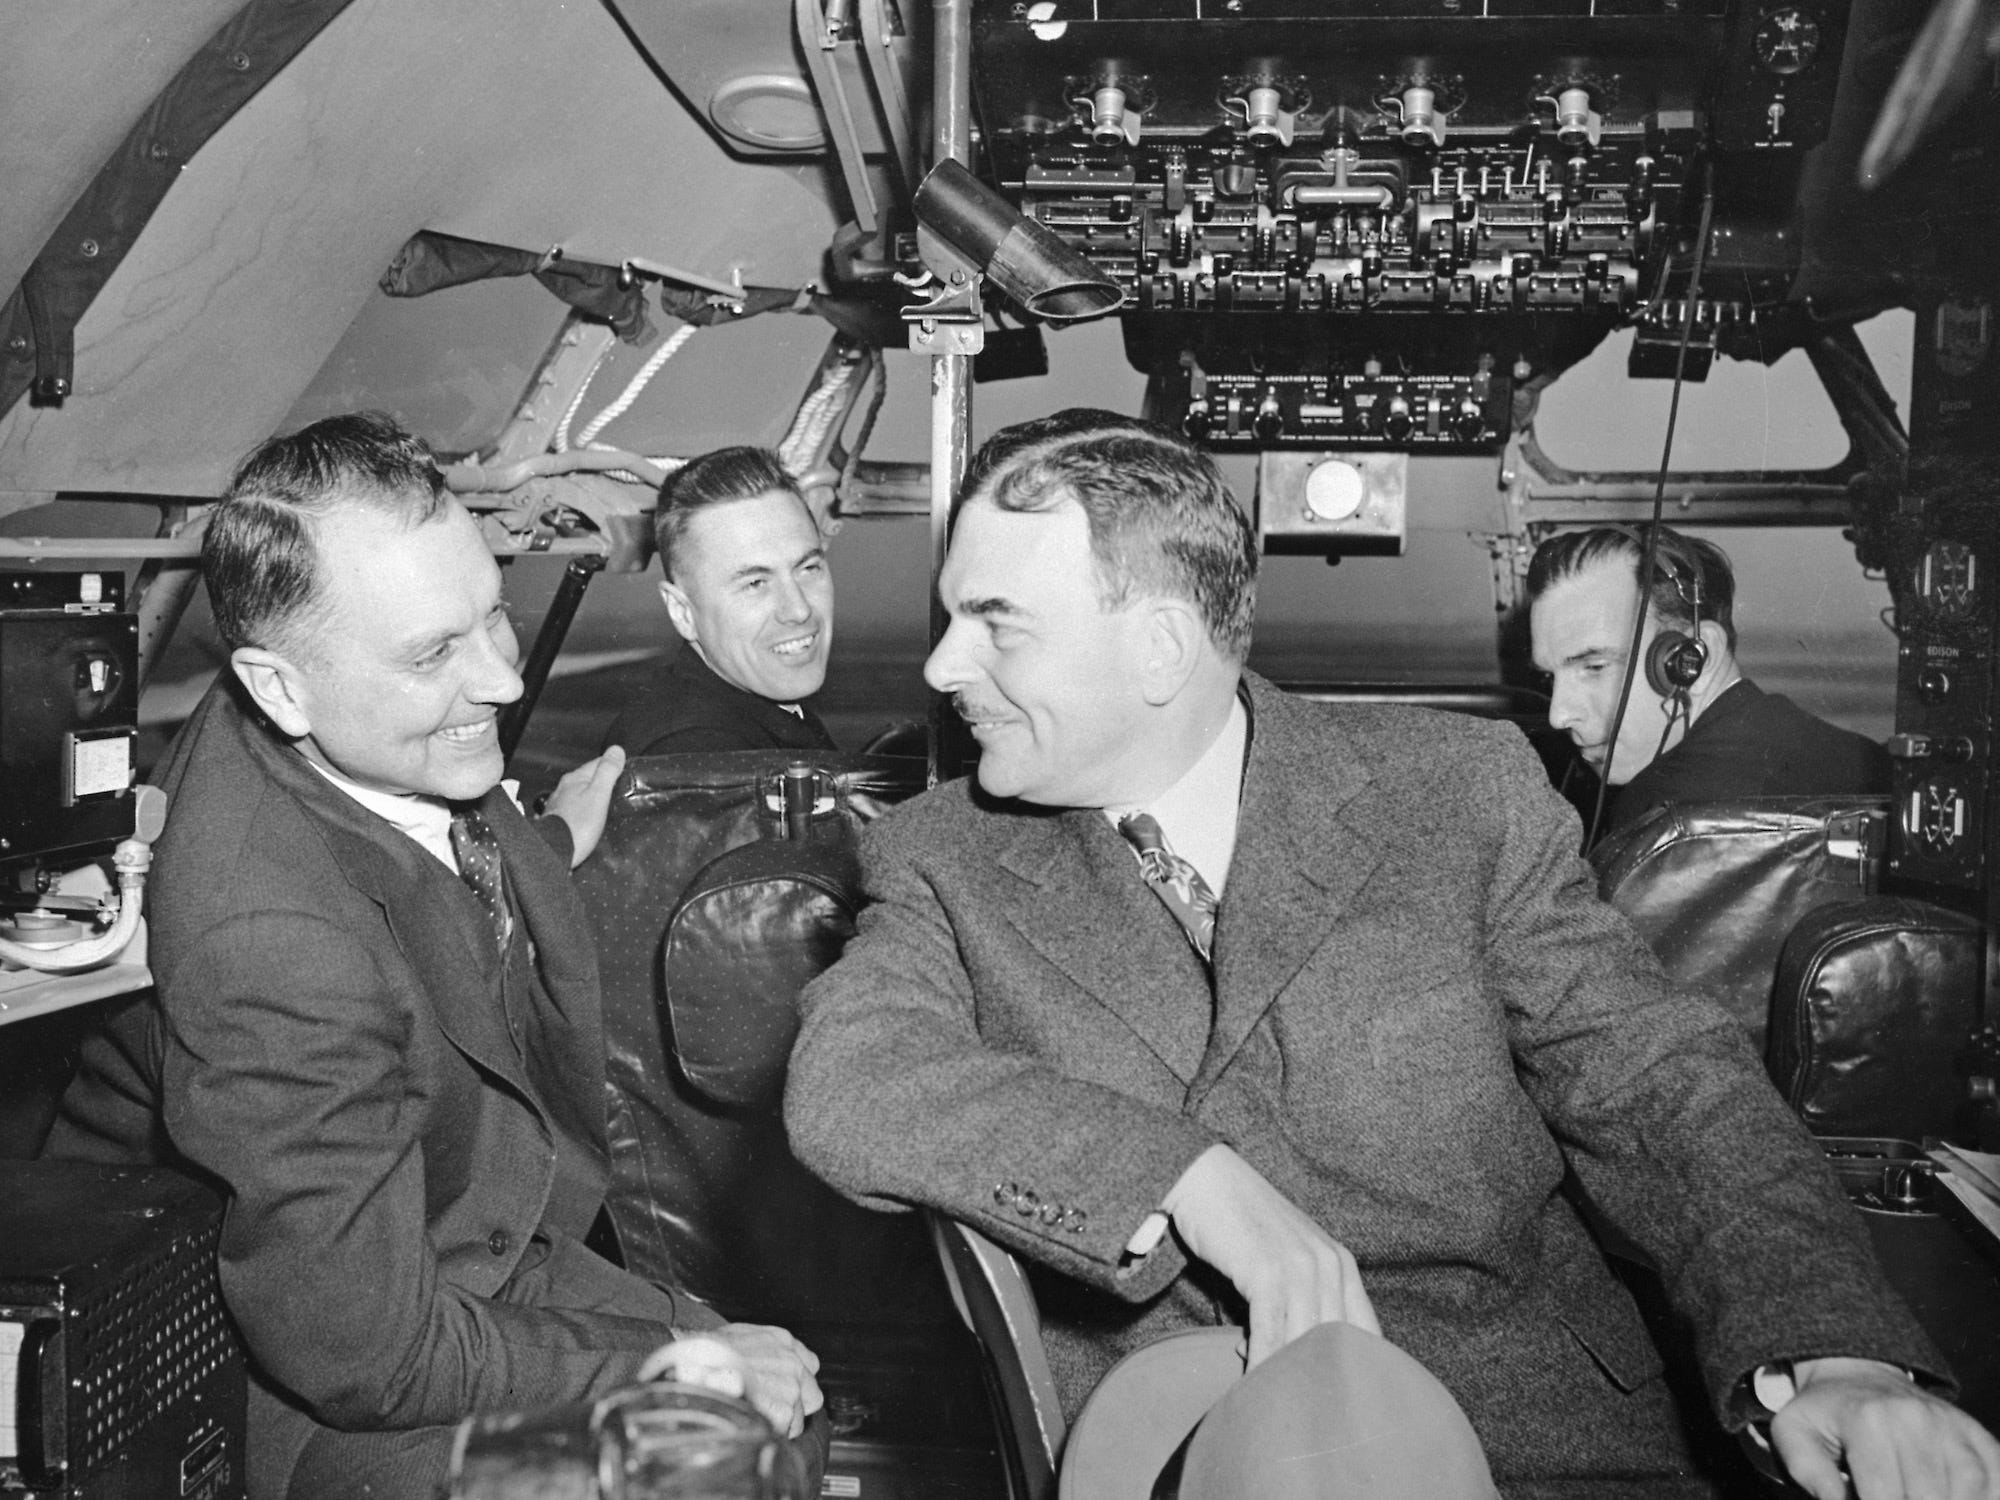 New York Governor Thomas E. Dewey (right) and Juan Trippe (left) in a Clipper cockpit with their two pilots.